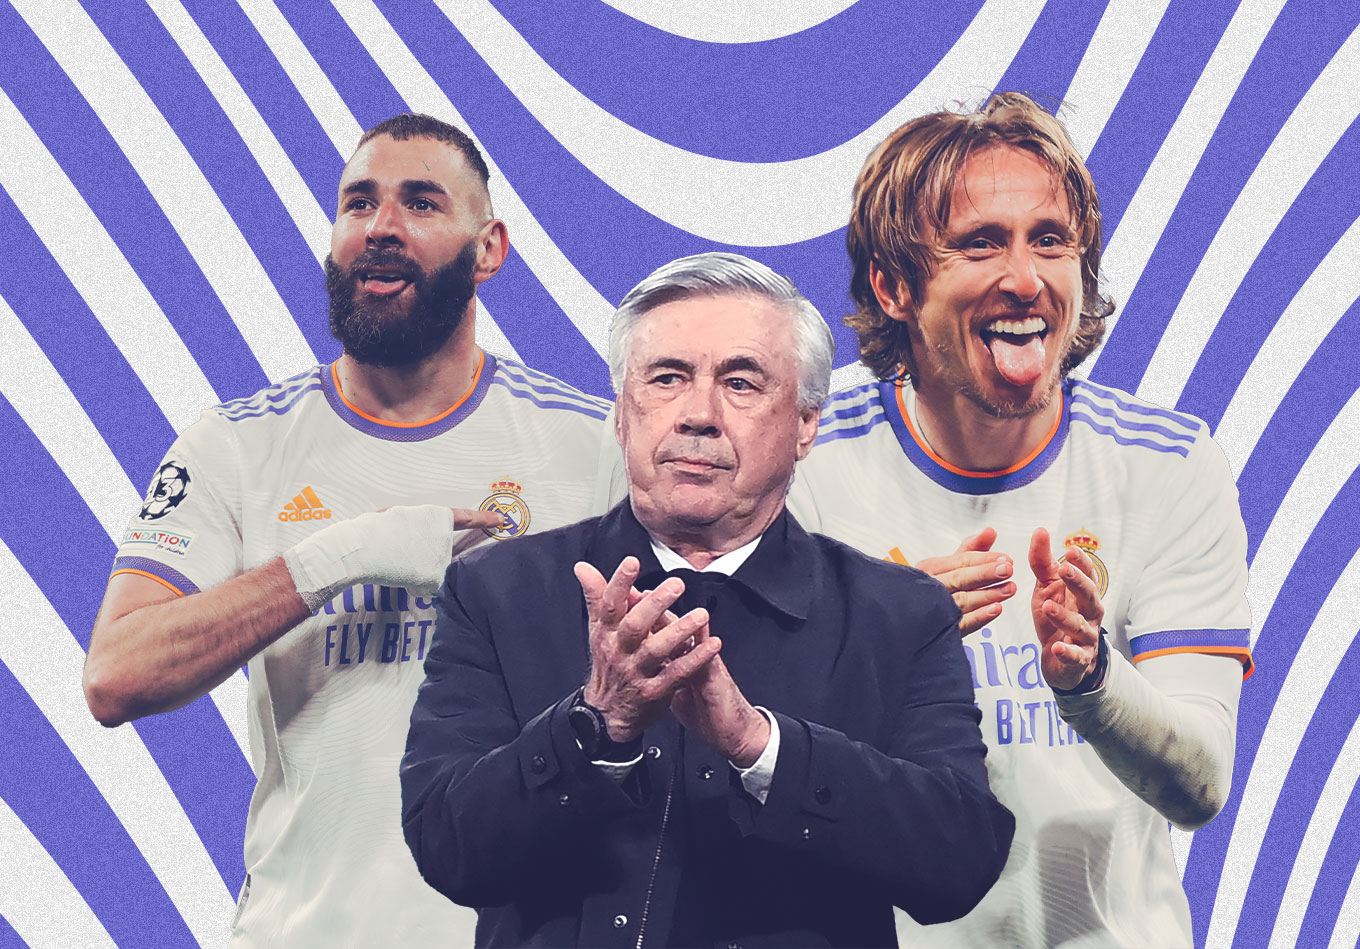 First La Liga and Now a Champions League Final: How Benzema and Modric Are Madrid’s Evergreen Duo